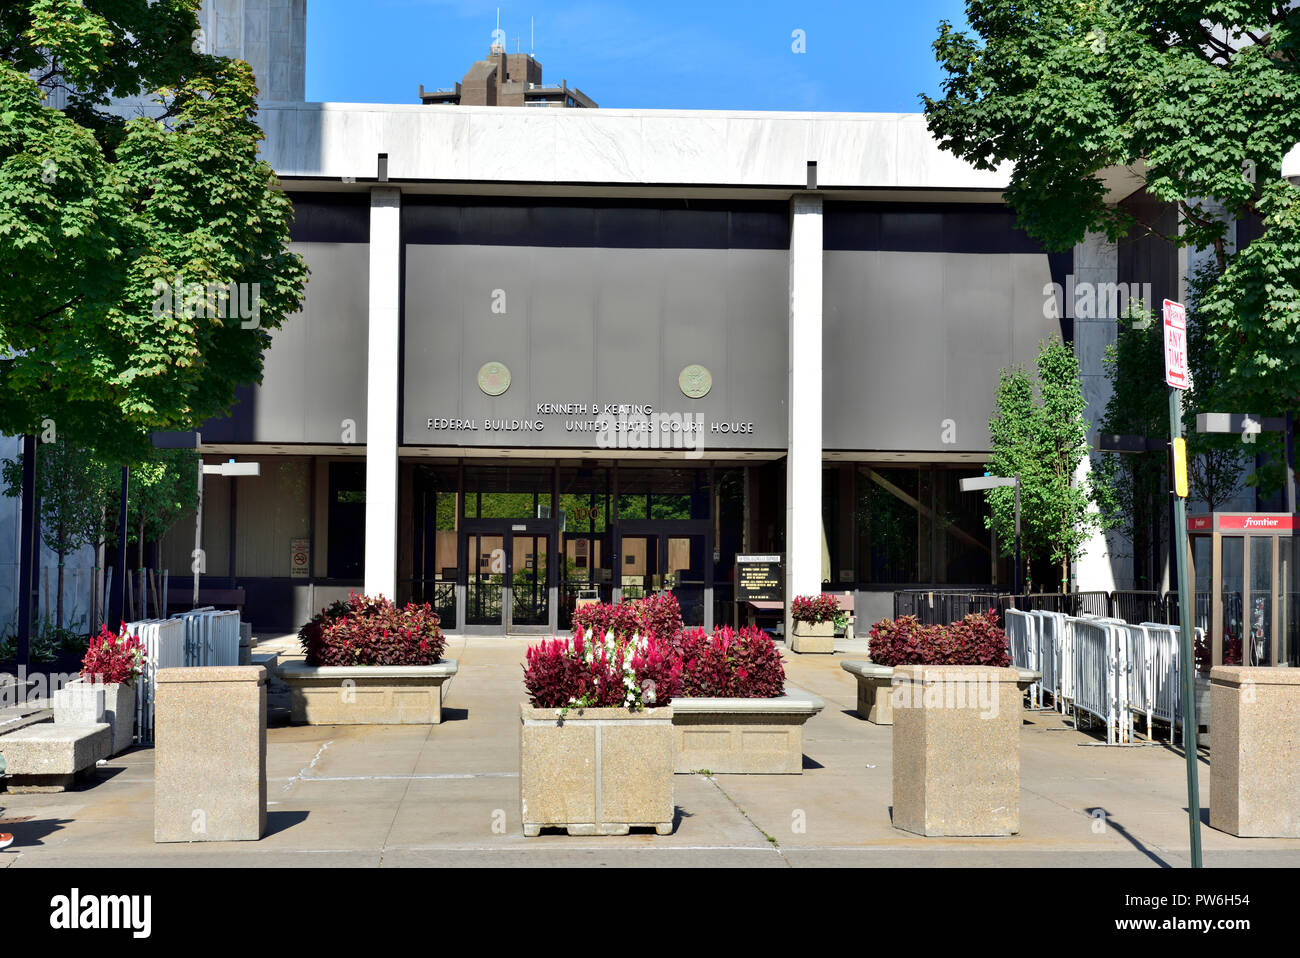 United States Court House, Kenneth B. Keating, Federal Building, Rochester, New York, USA Stockfoto